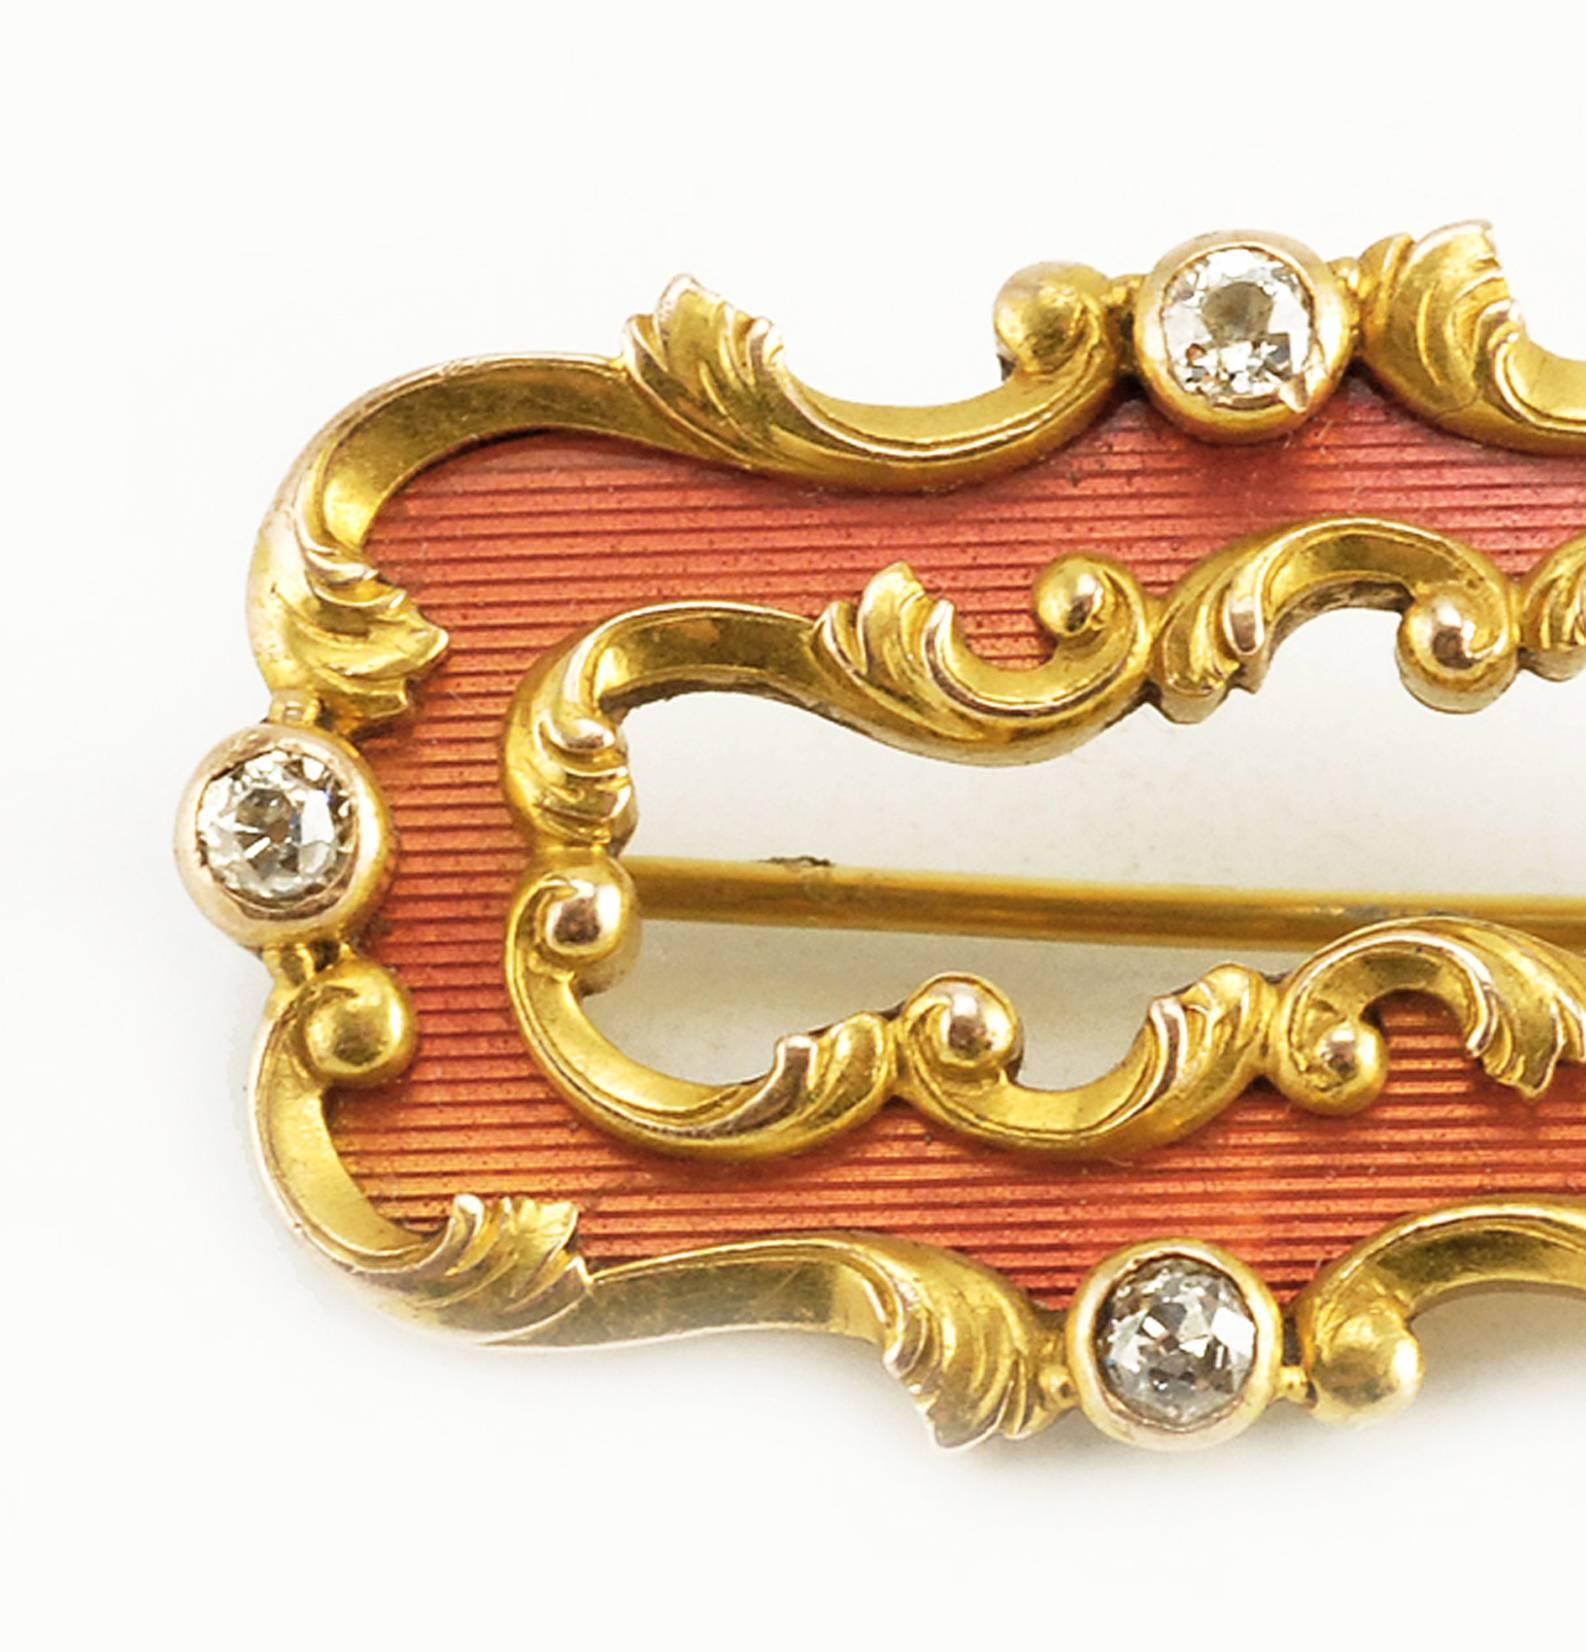 A Fabergé gold-mounted and diamond-set guilloché enamel brooch, workmaster Oscar Pihl (1860-1897), Moscow, circa 1900. Of shaped rectangular outline, the surface enameled translucent salmon-hued peach over engine-turned reeding, within finely